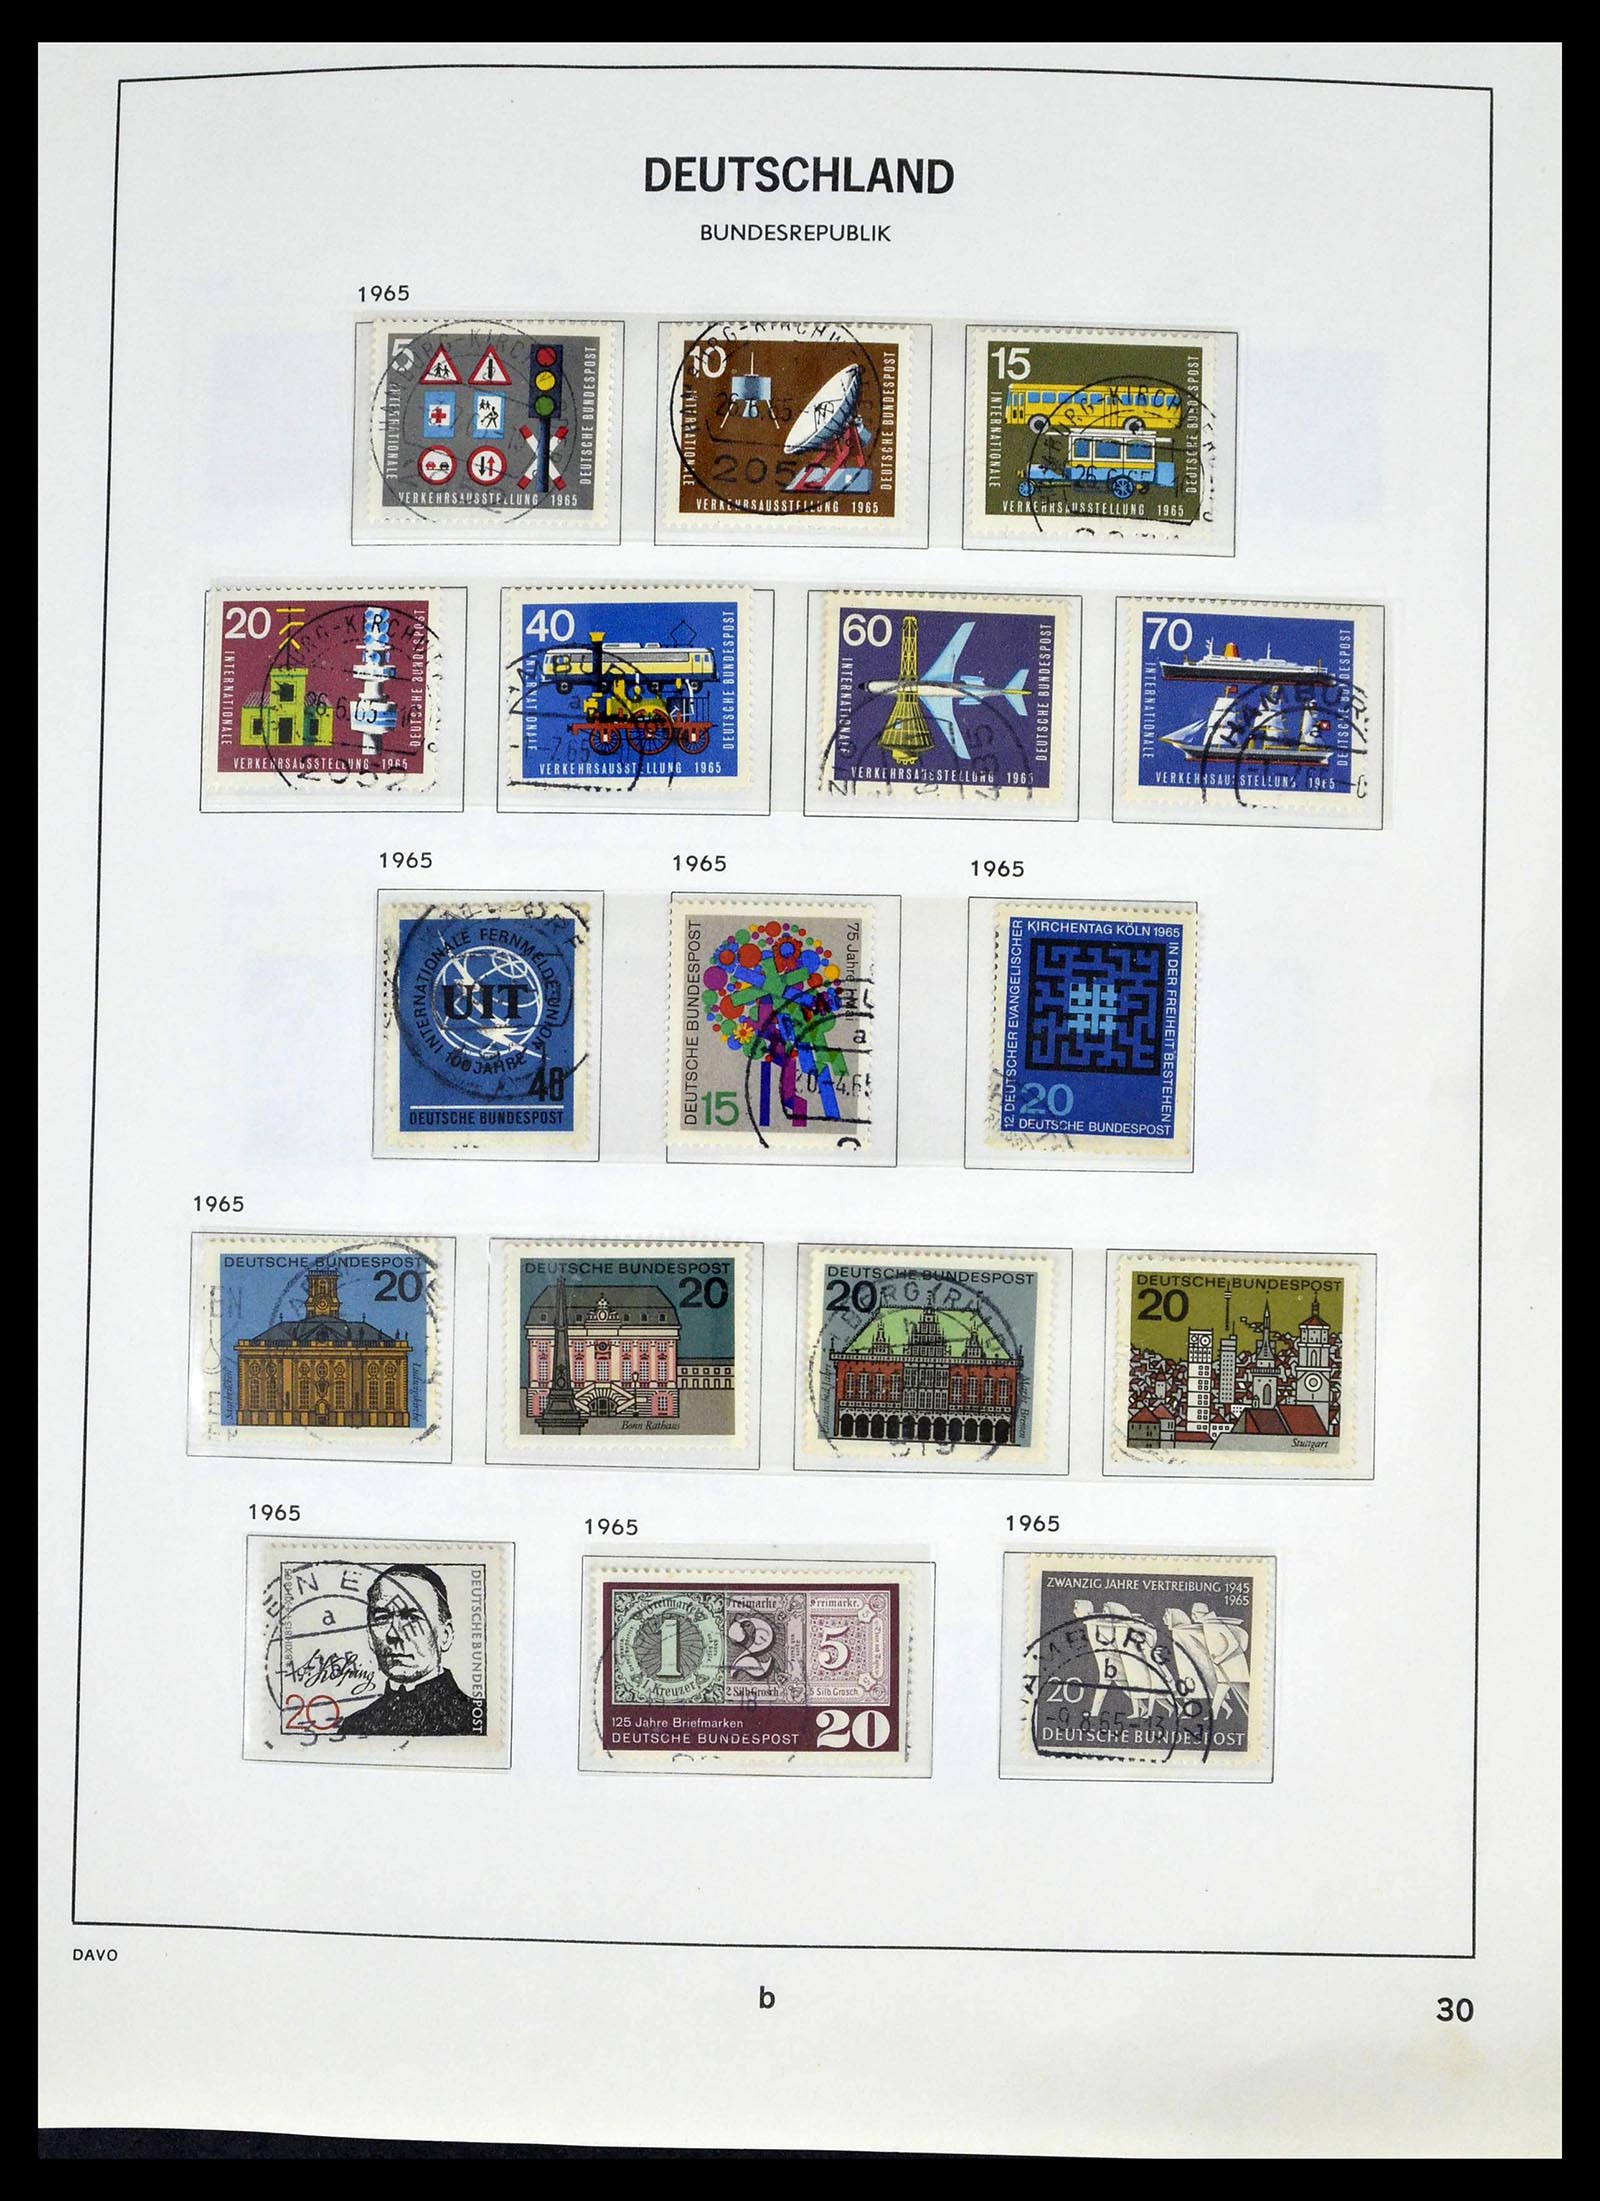 39326 0026 - Stamp collection 39326 Bundespost 1949-2003.